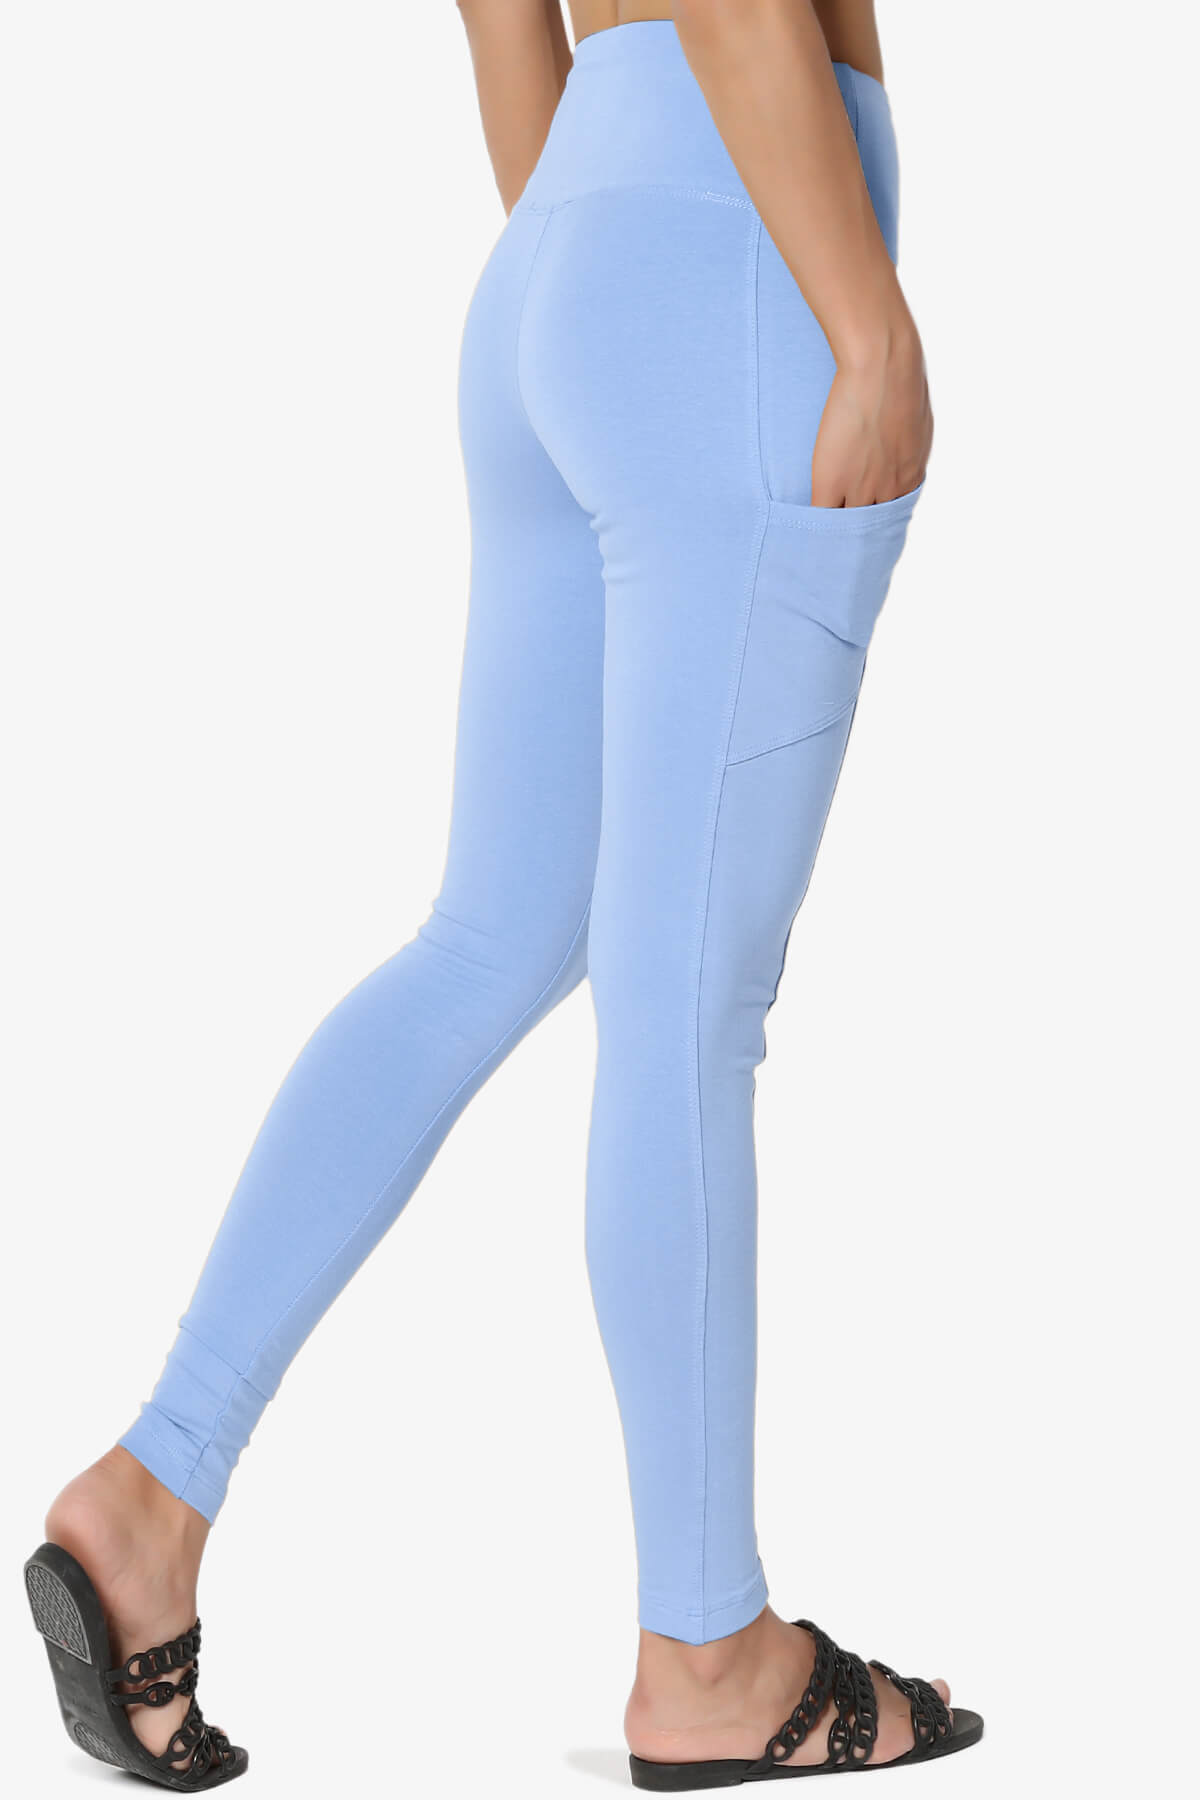 Ansley Luxe Cotton Leggings with Pockets LIGHT BLUE_4